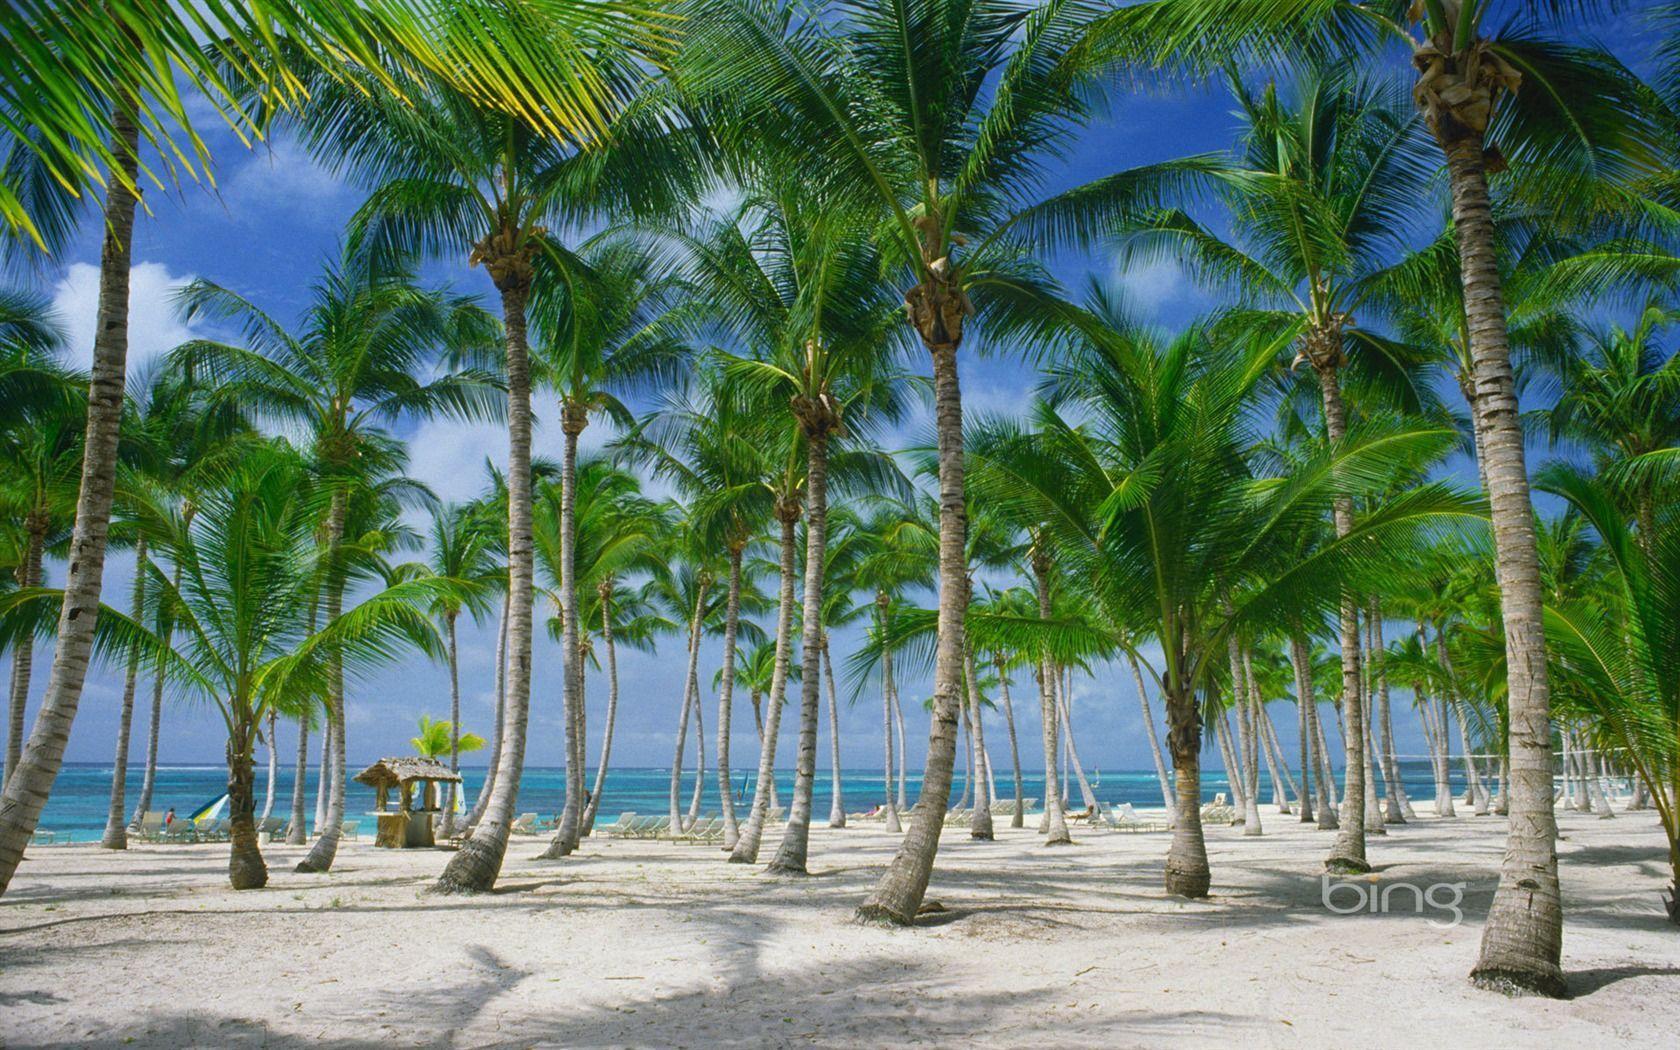 Palm trees on the beach in Punta Cana Dominican Republic